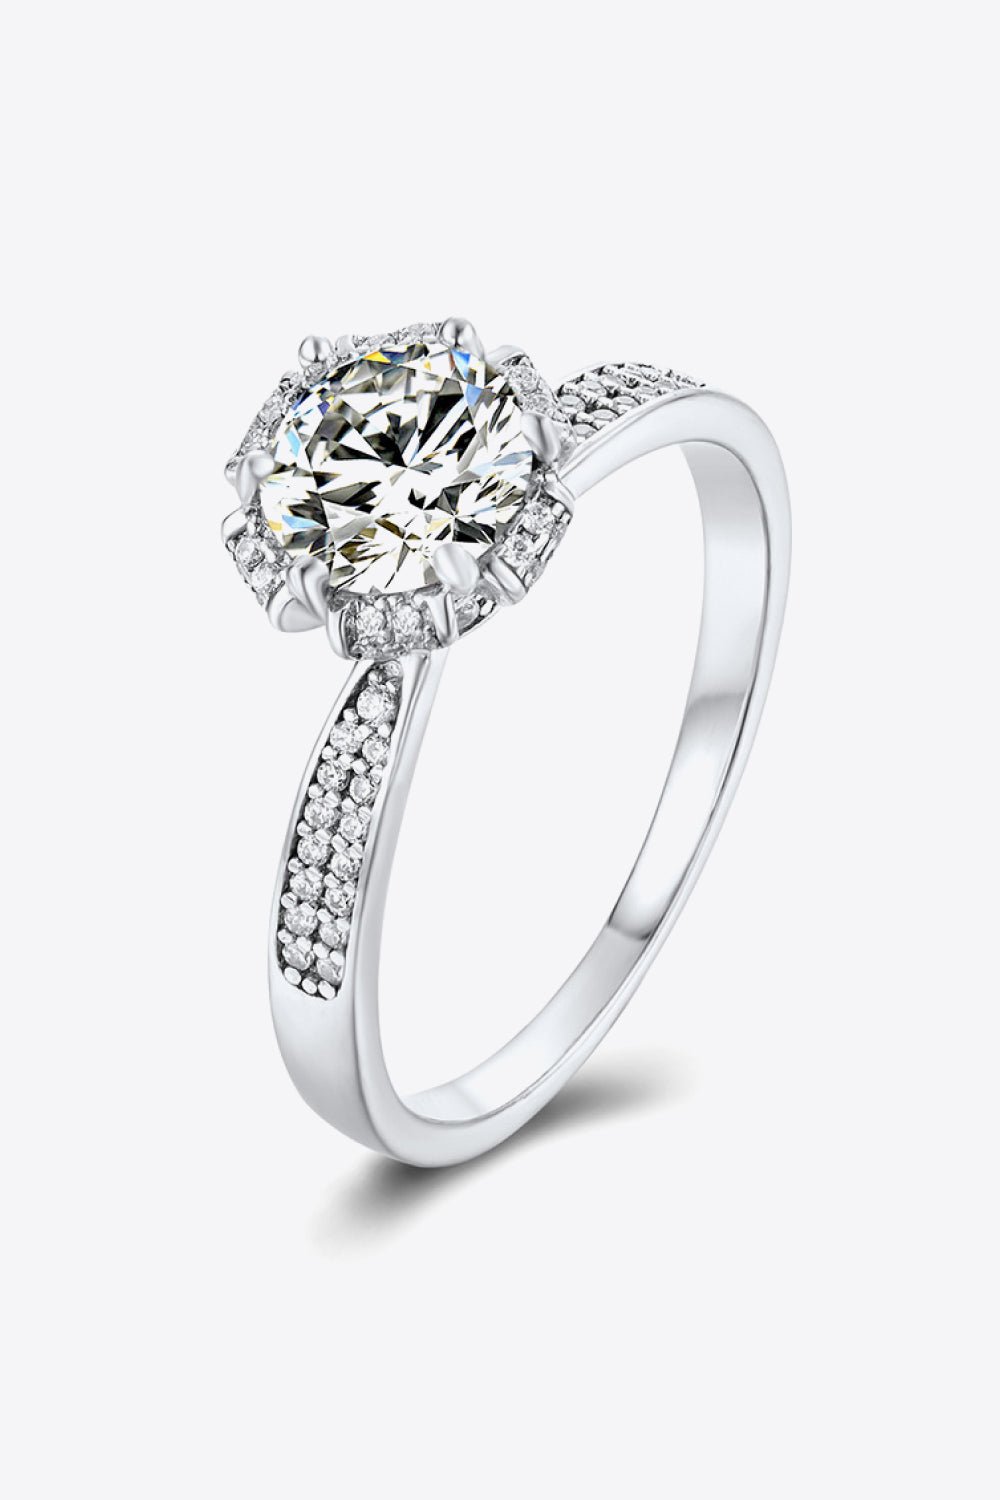 925 Sterling Silver 1 Carat Moissanite Ring - Carbone's Marketplace